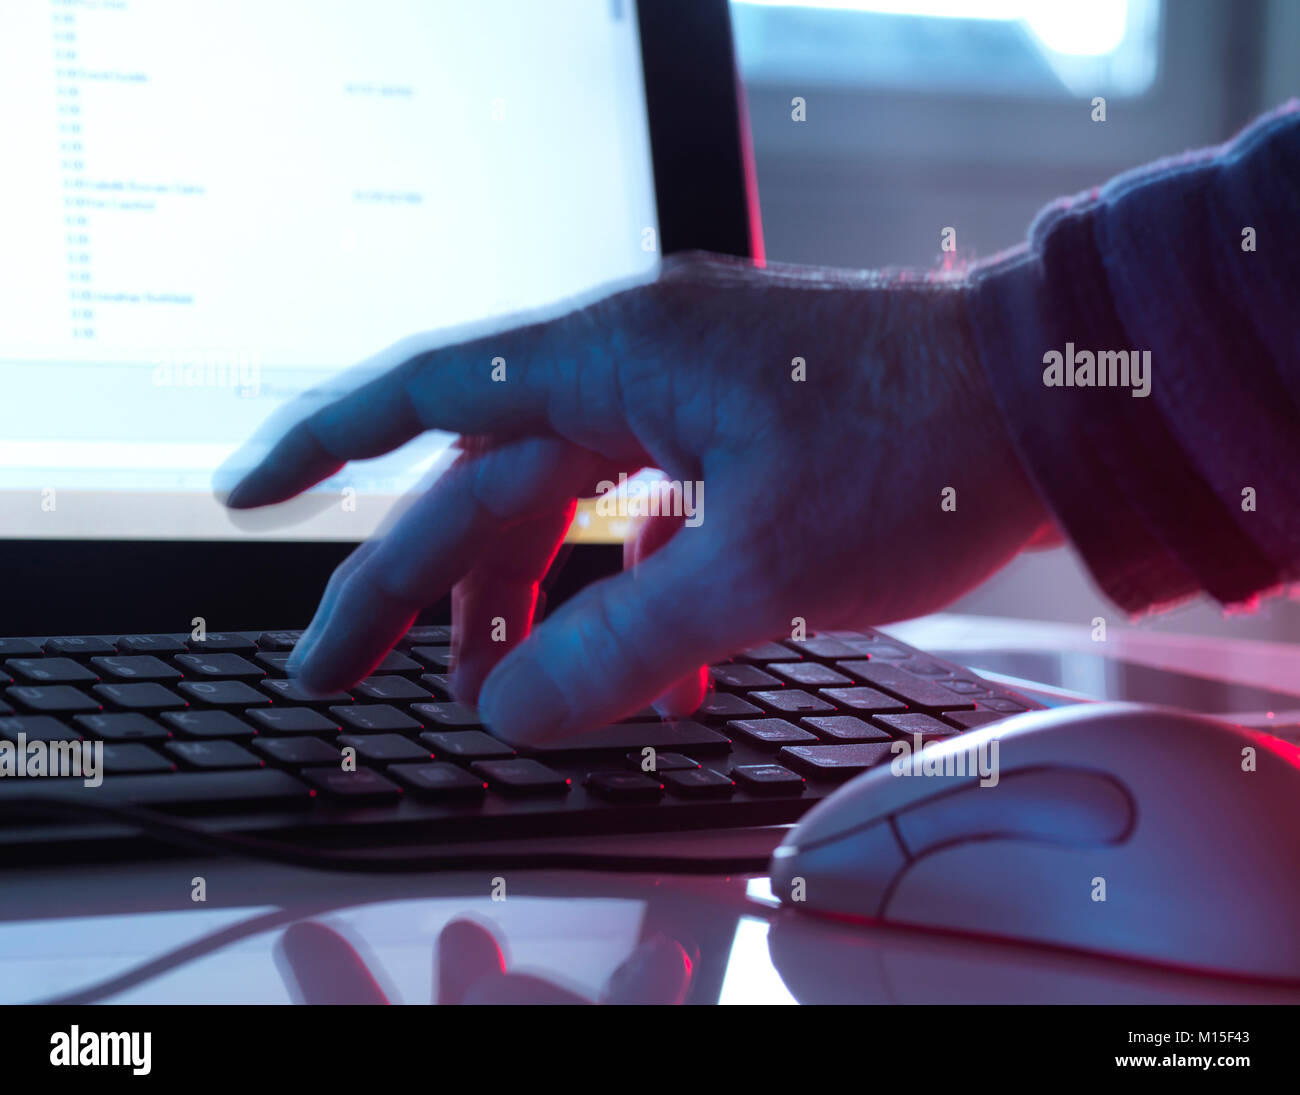 MODEL RELEASED. Computer hacking, conceptual image. Stock Photo